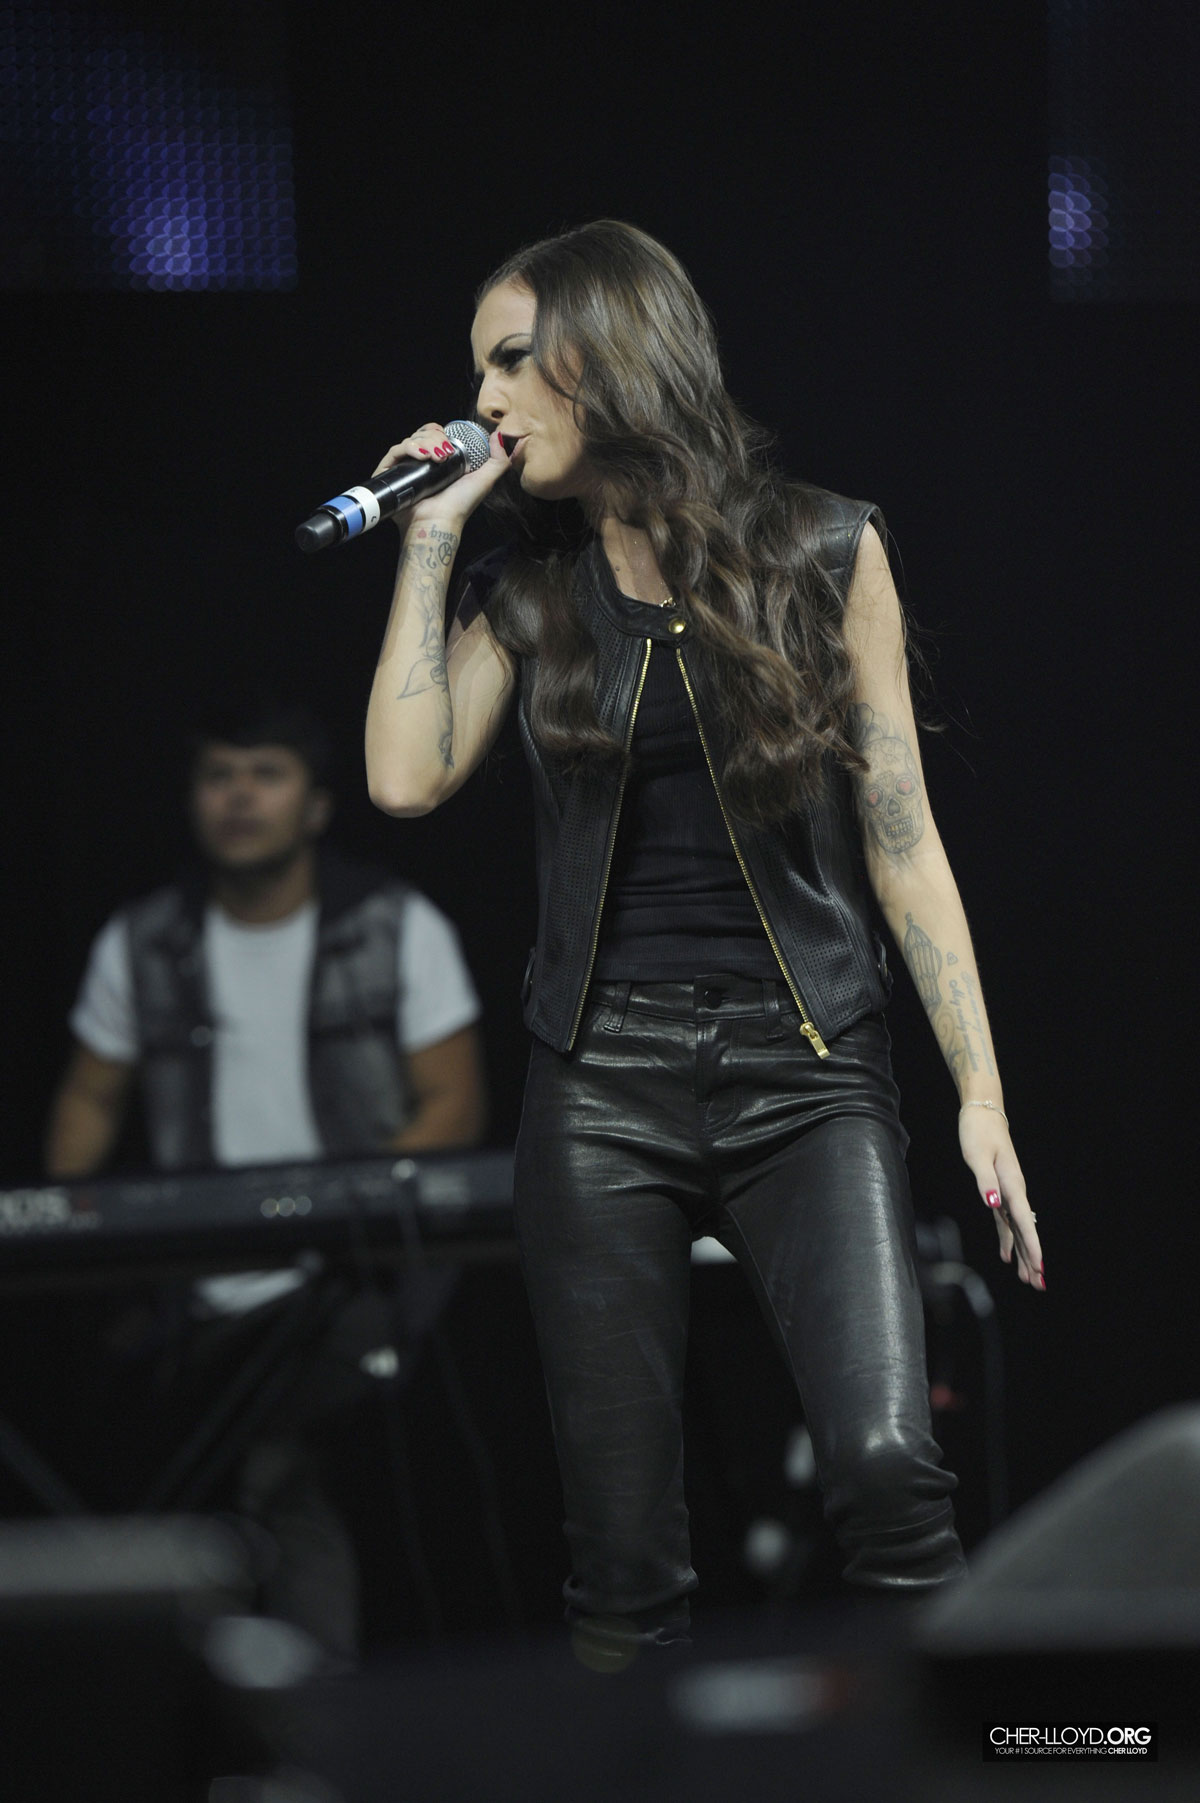 Cher Lloyd performs at Key 103 Live